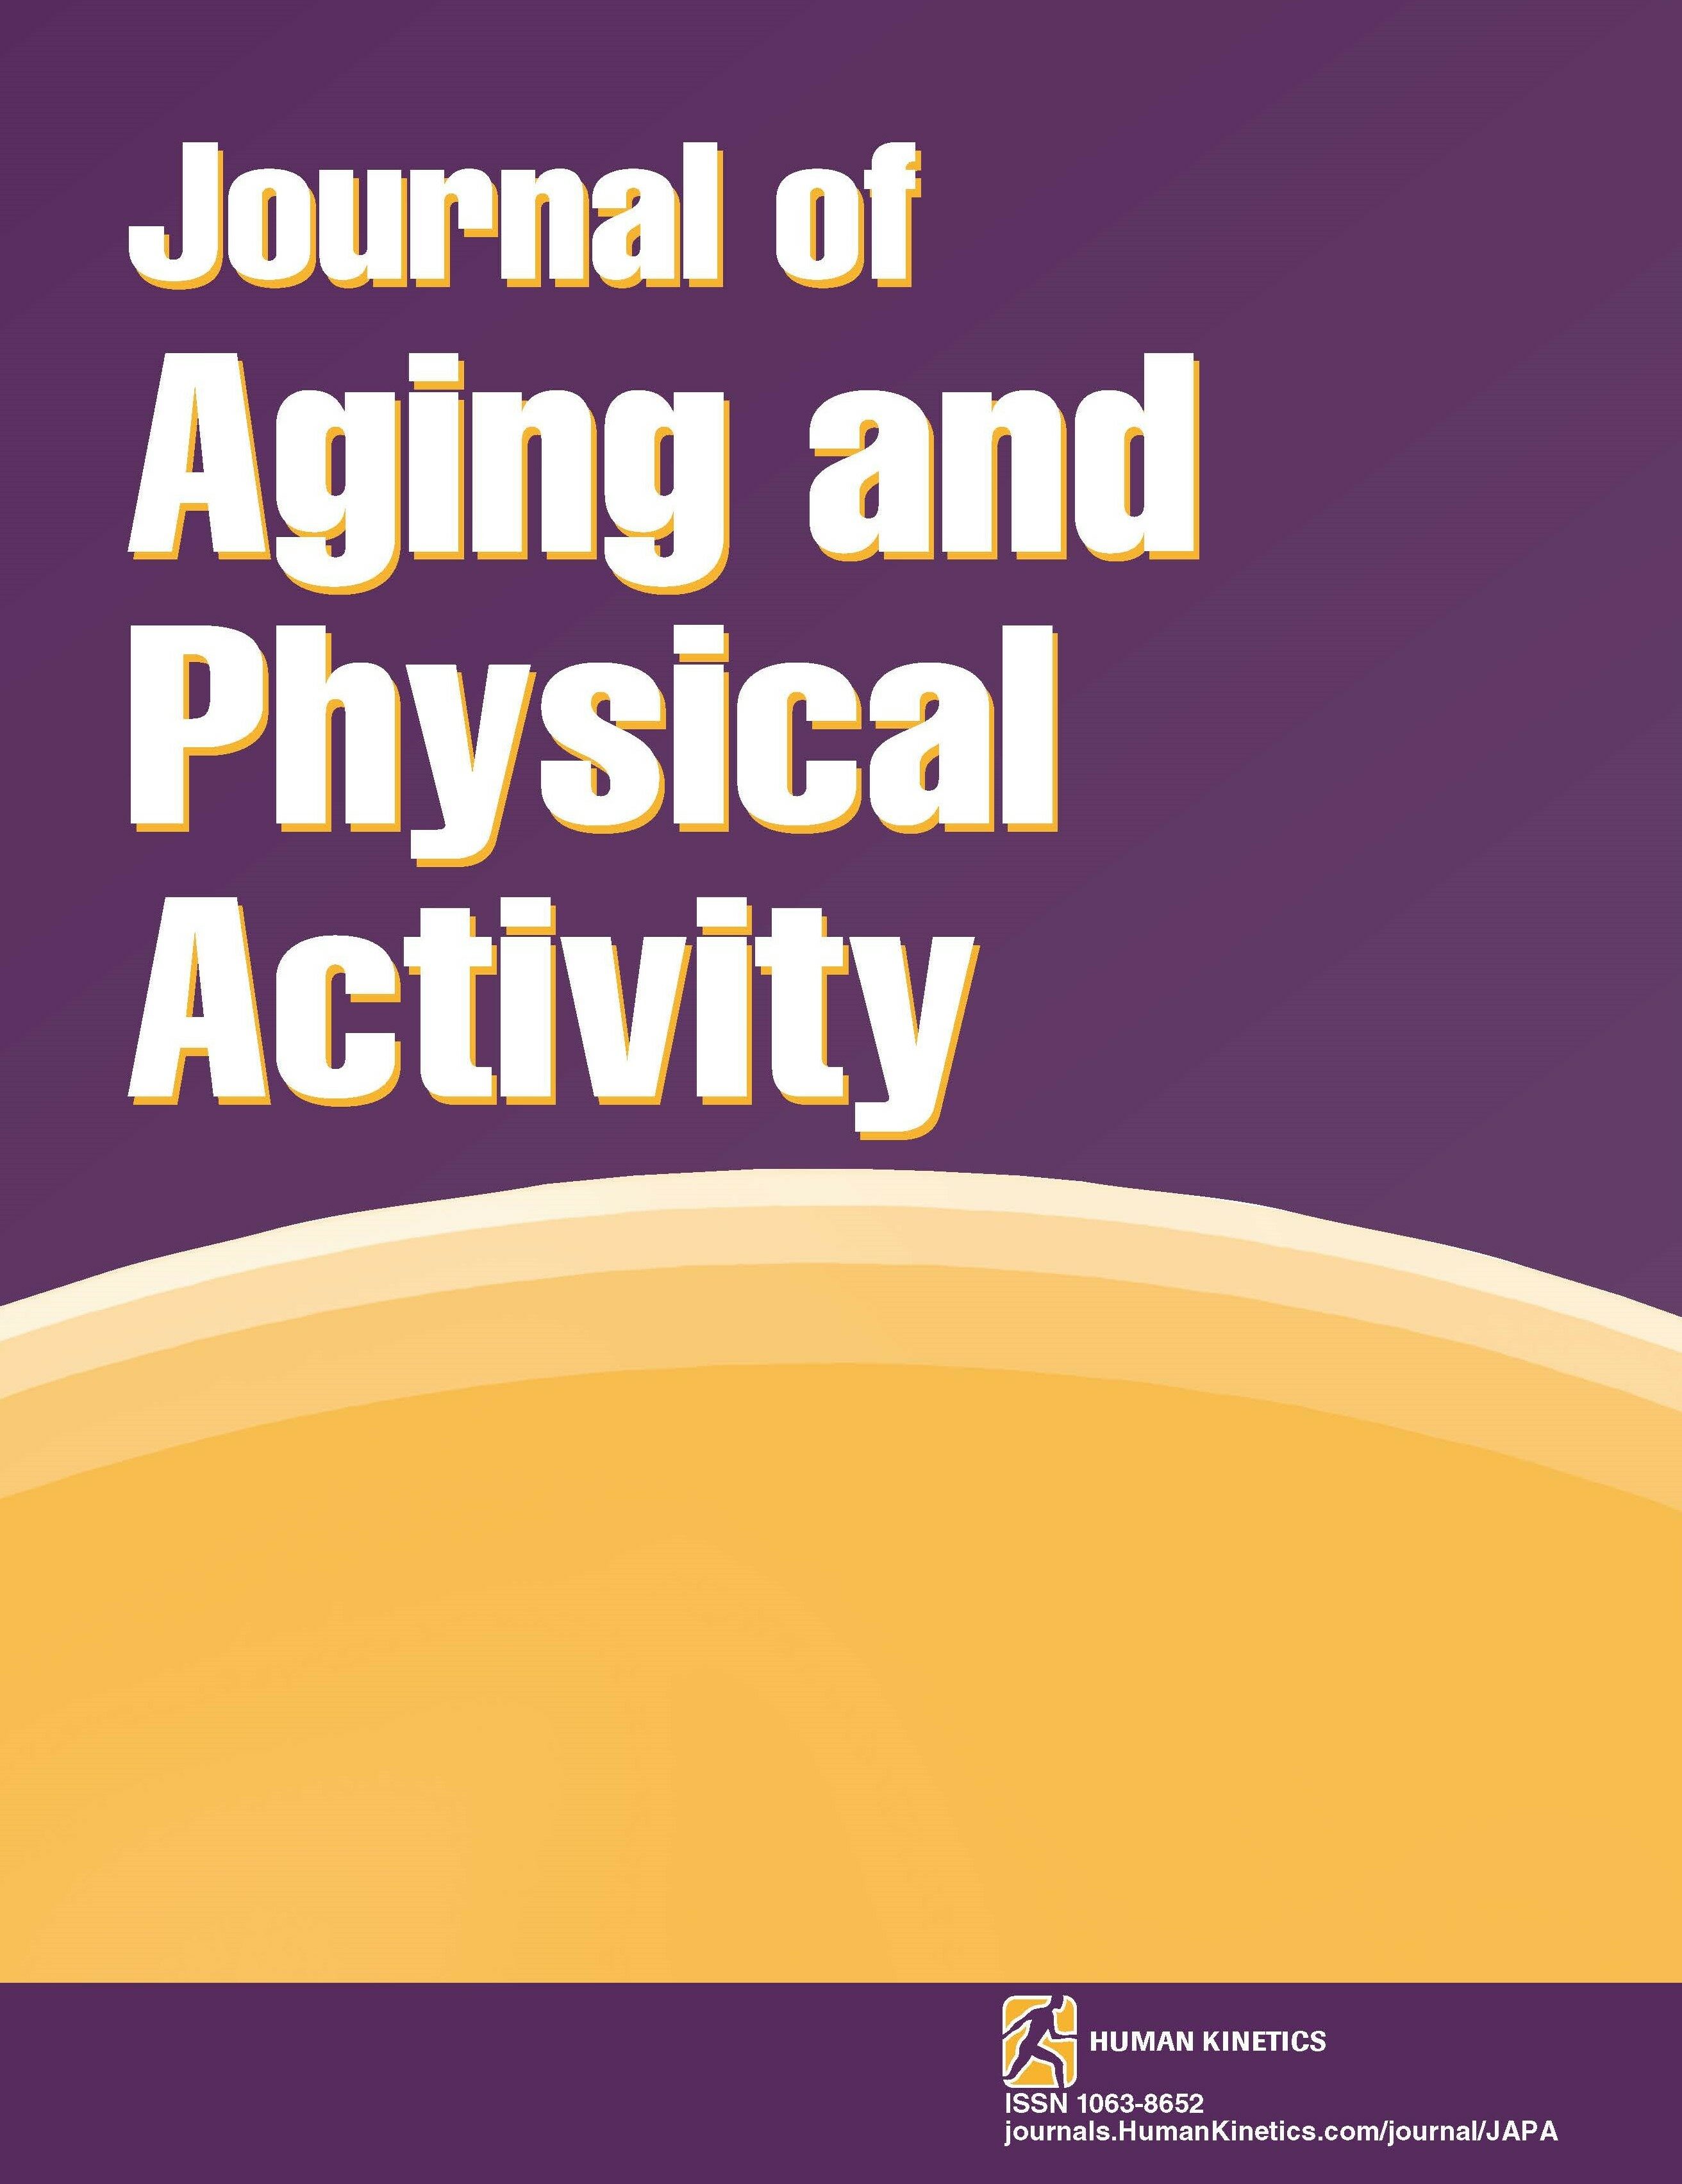 Physical Behavior Profiles Among Older Adults and Their Associations With Physical Capacity and Life-Space Mobility